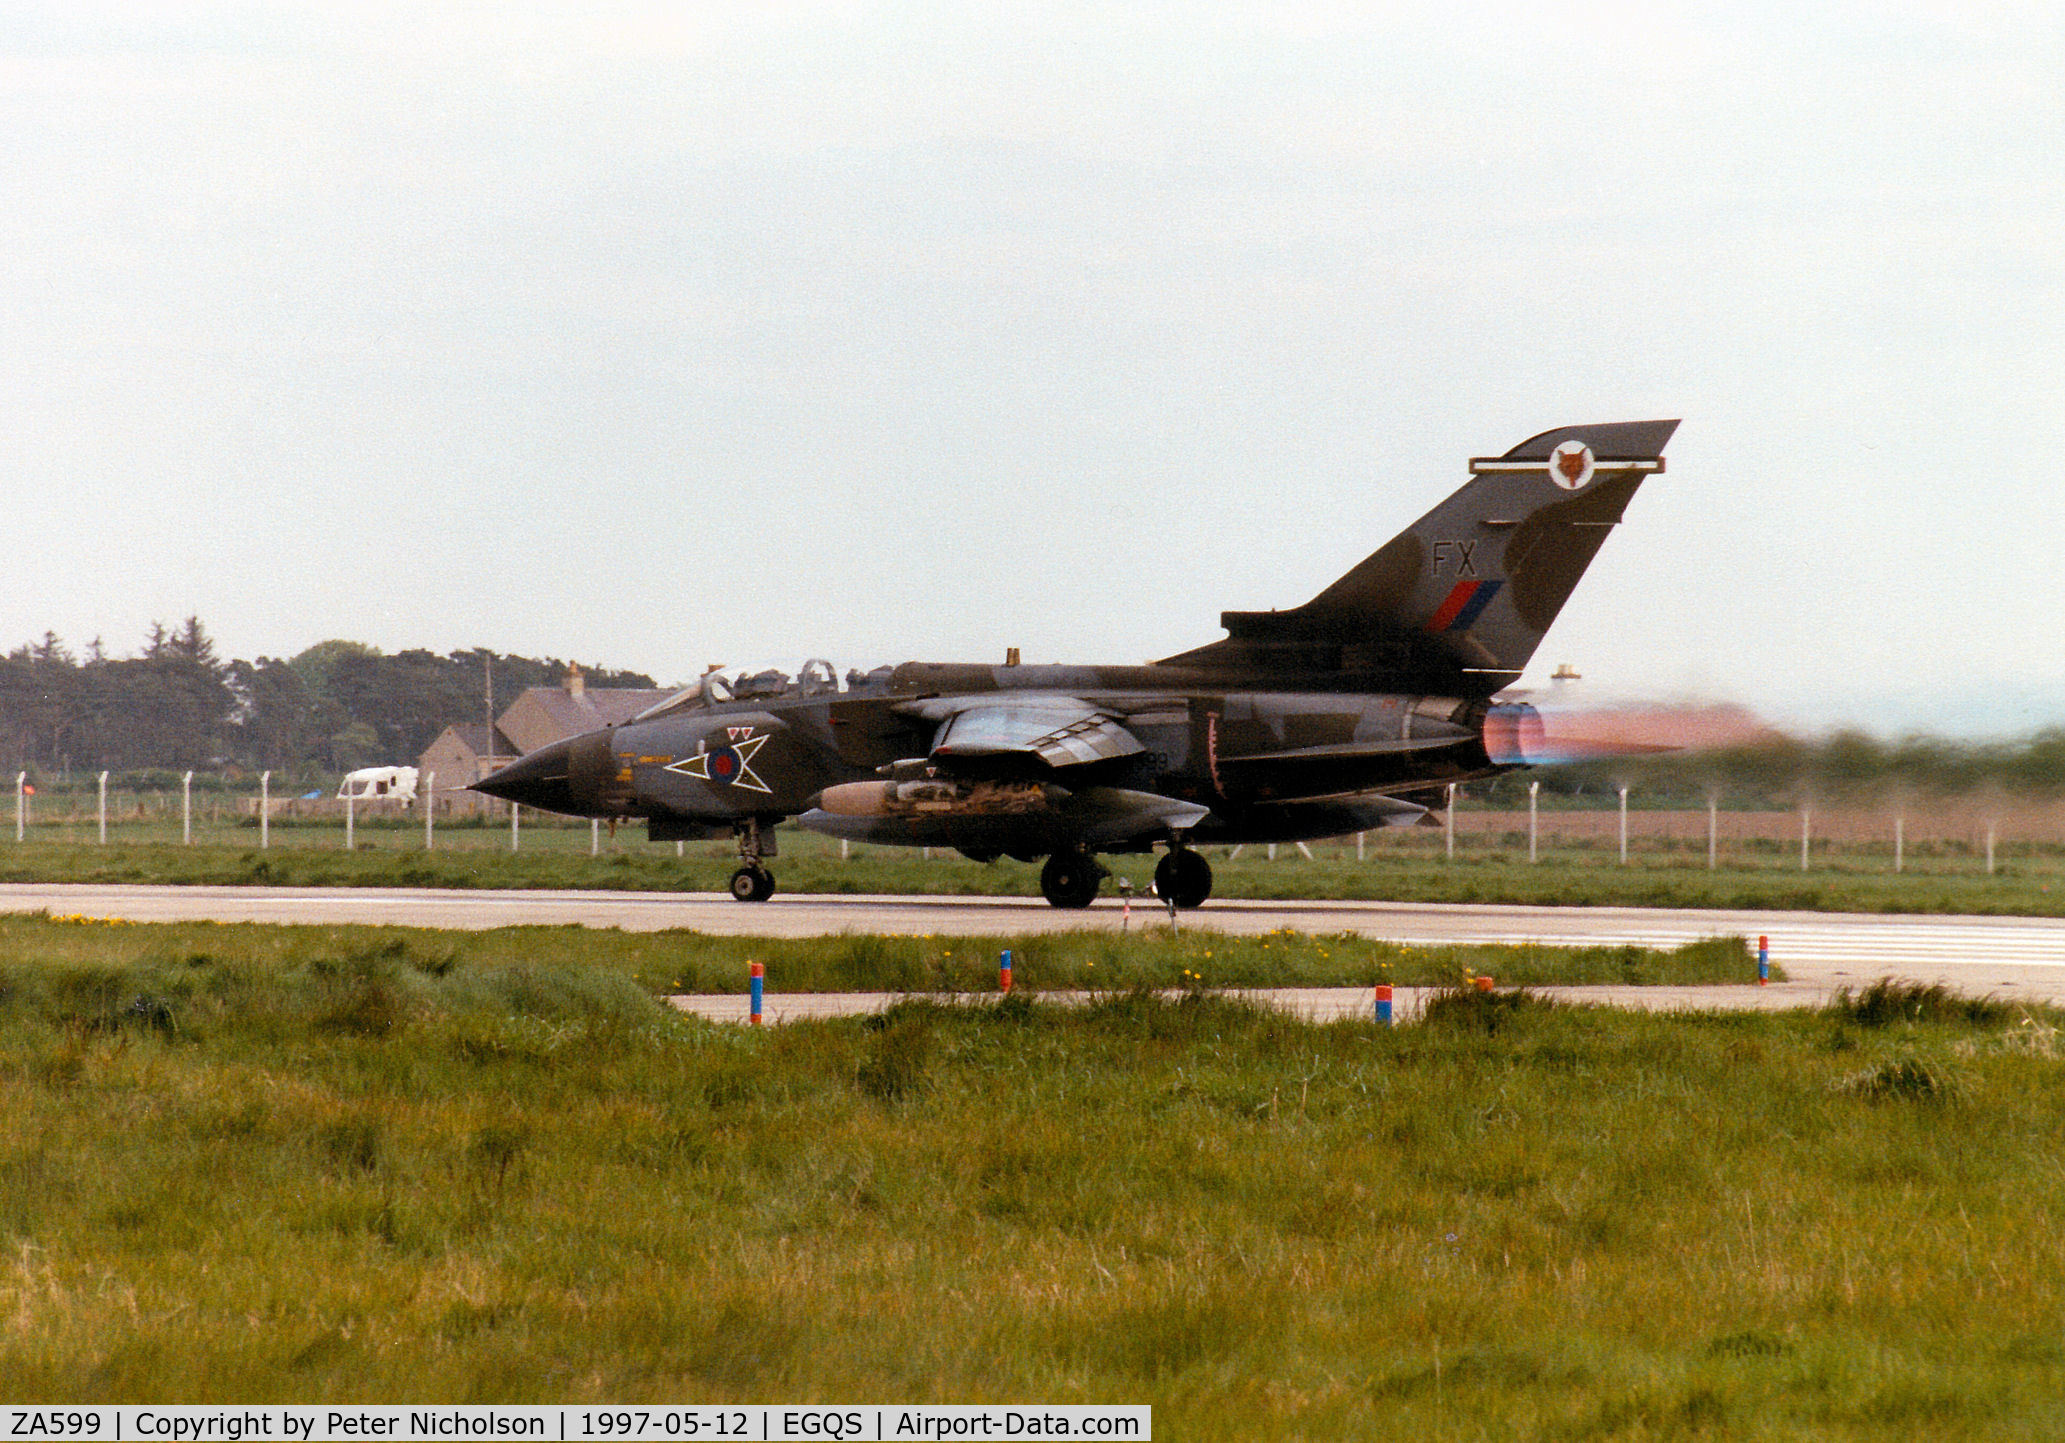 ZA599, 1982 Panavia Tornado GR.1 C/N 120/BT025/3063, Tornado GR.1 of 12 Squadron taking off from Runway 05 at RAF Lossiemouth in the Summer of 1997.